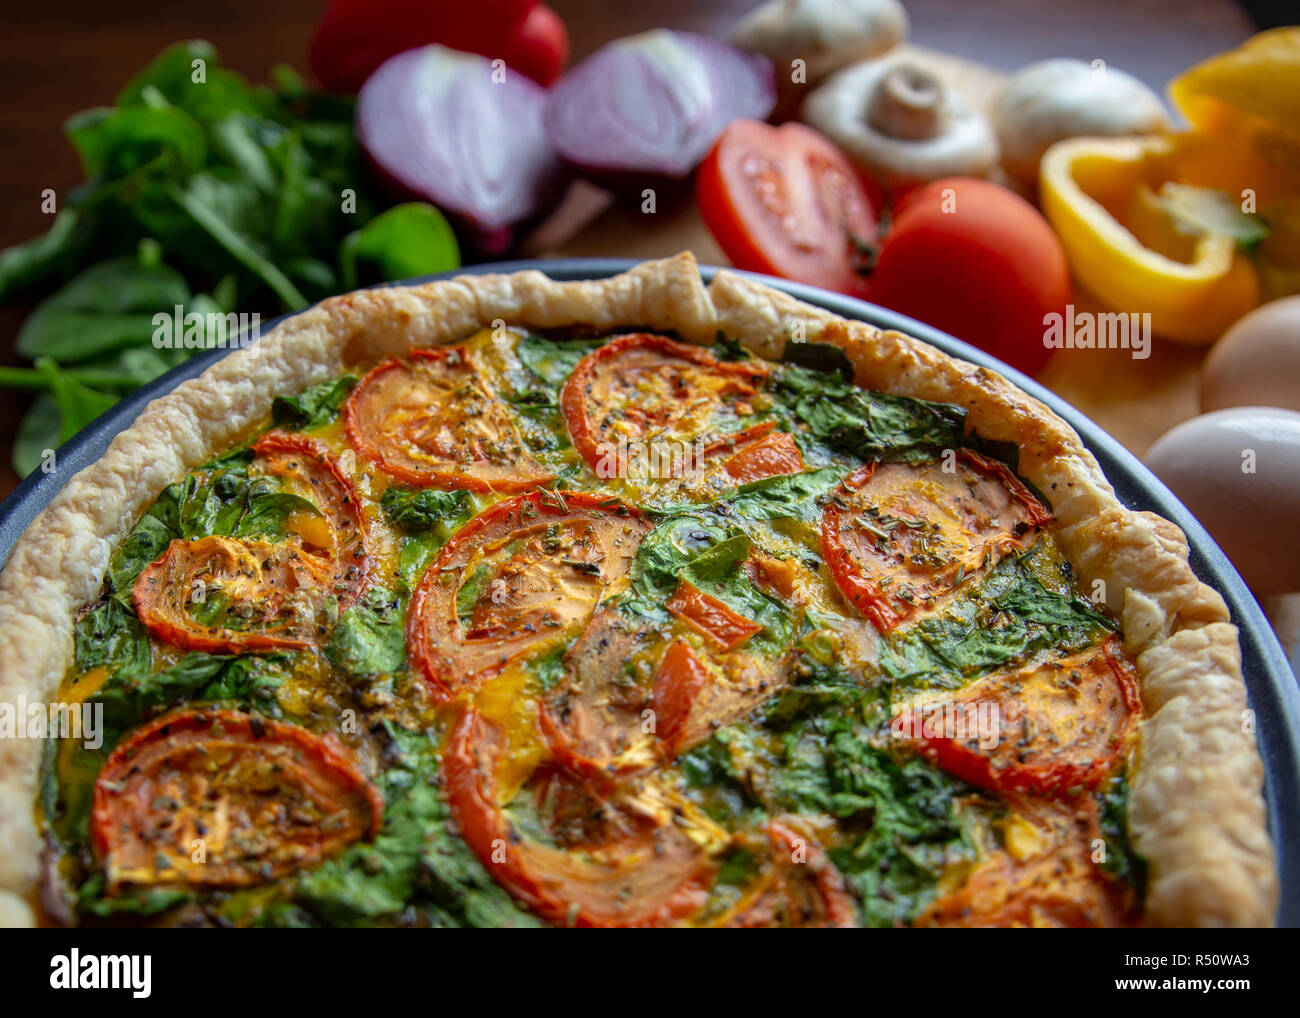 A hot quiche baked with healthy fresh vegetables and free range eggs Stock Photo